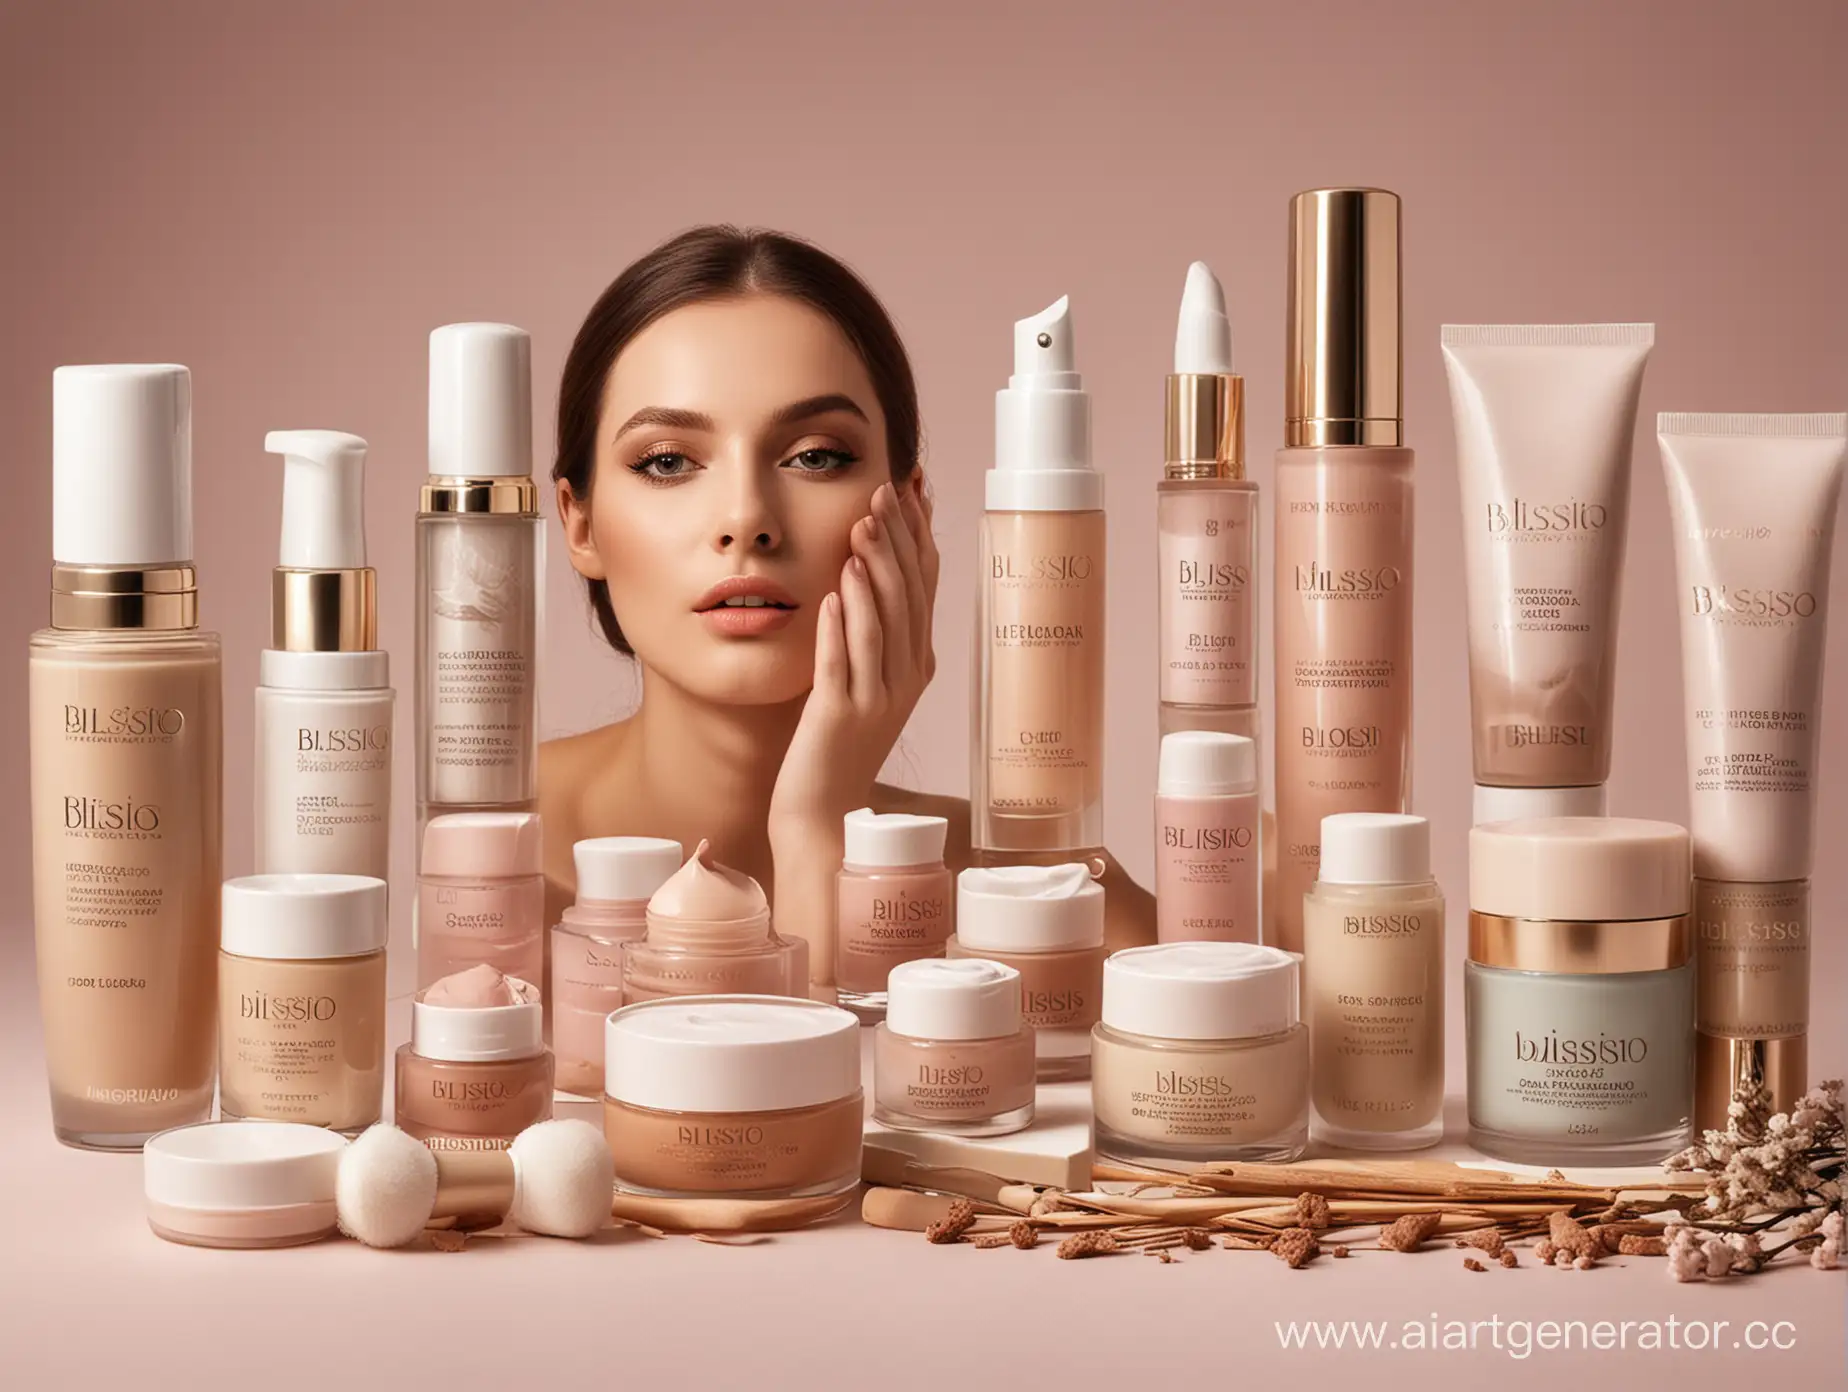 "BLISSIO" Cosmetics from Israel